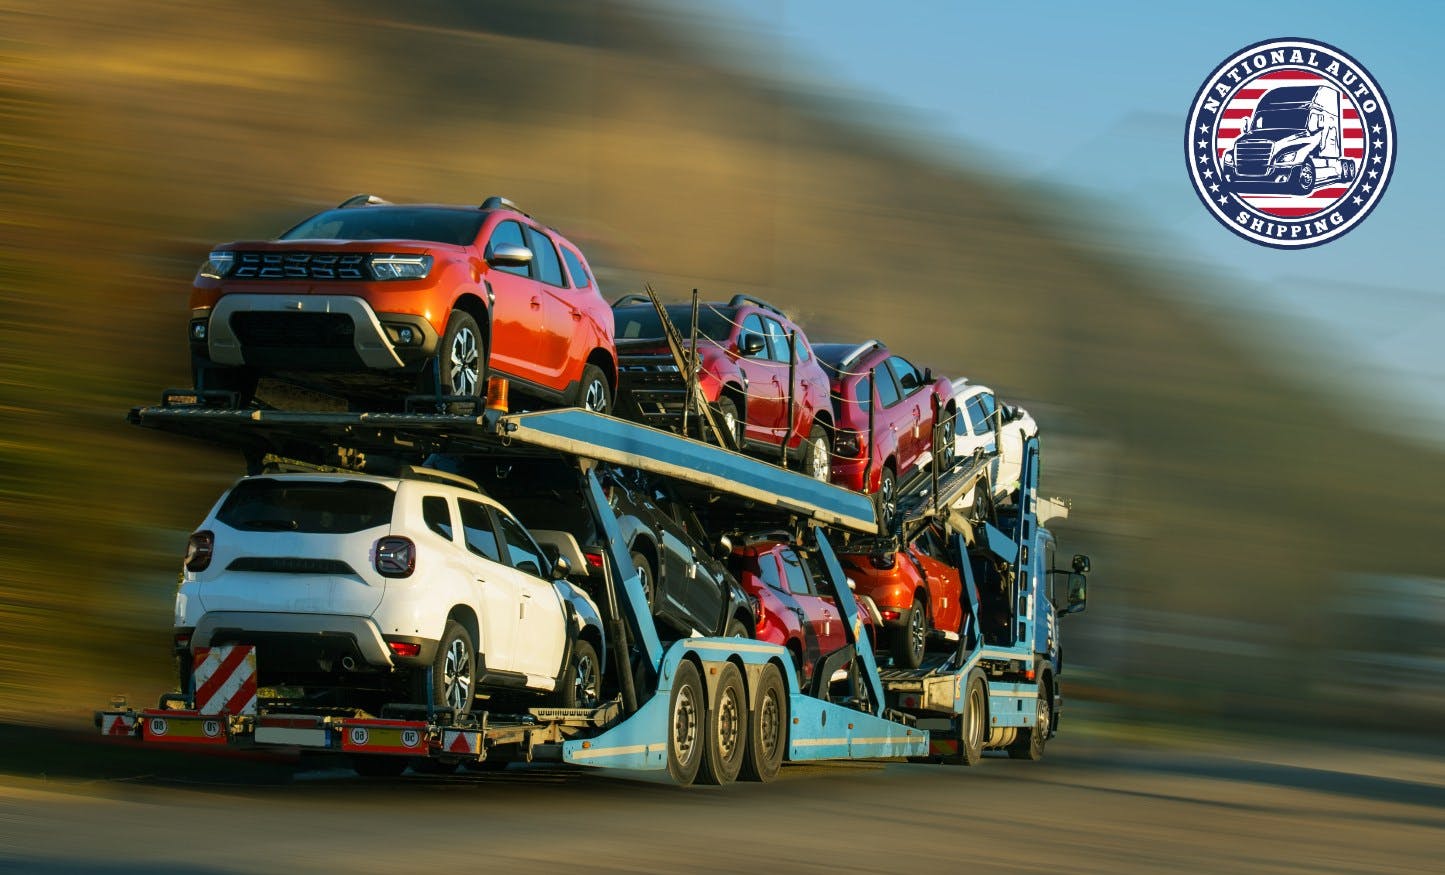 National Auto Shipping: Should I Ship My Car with Them?